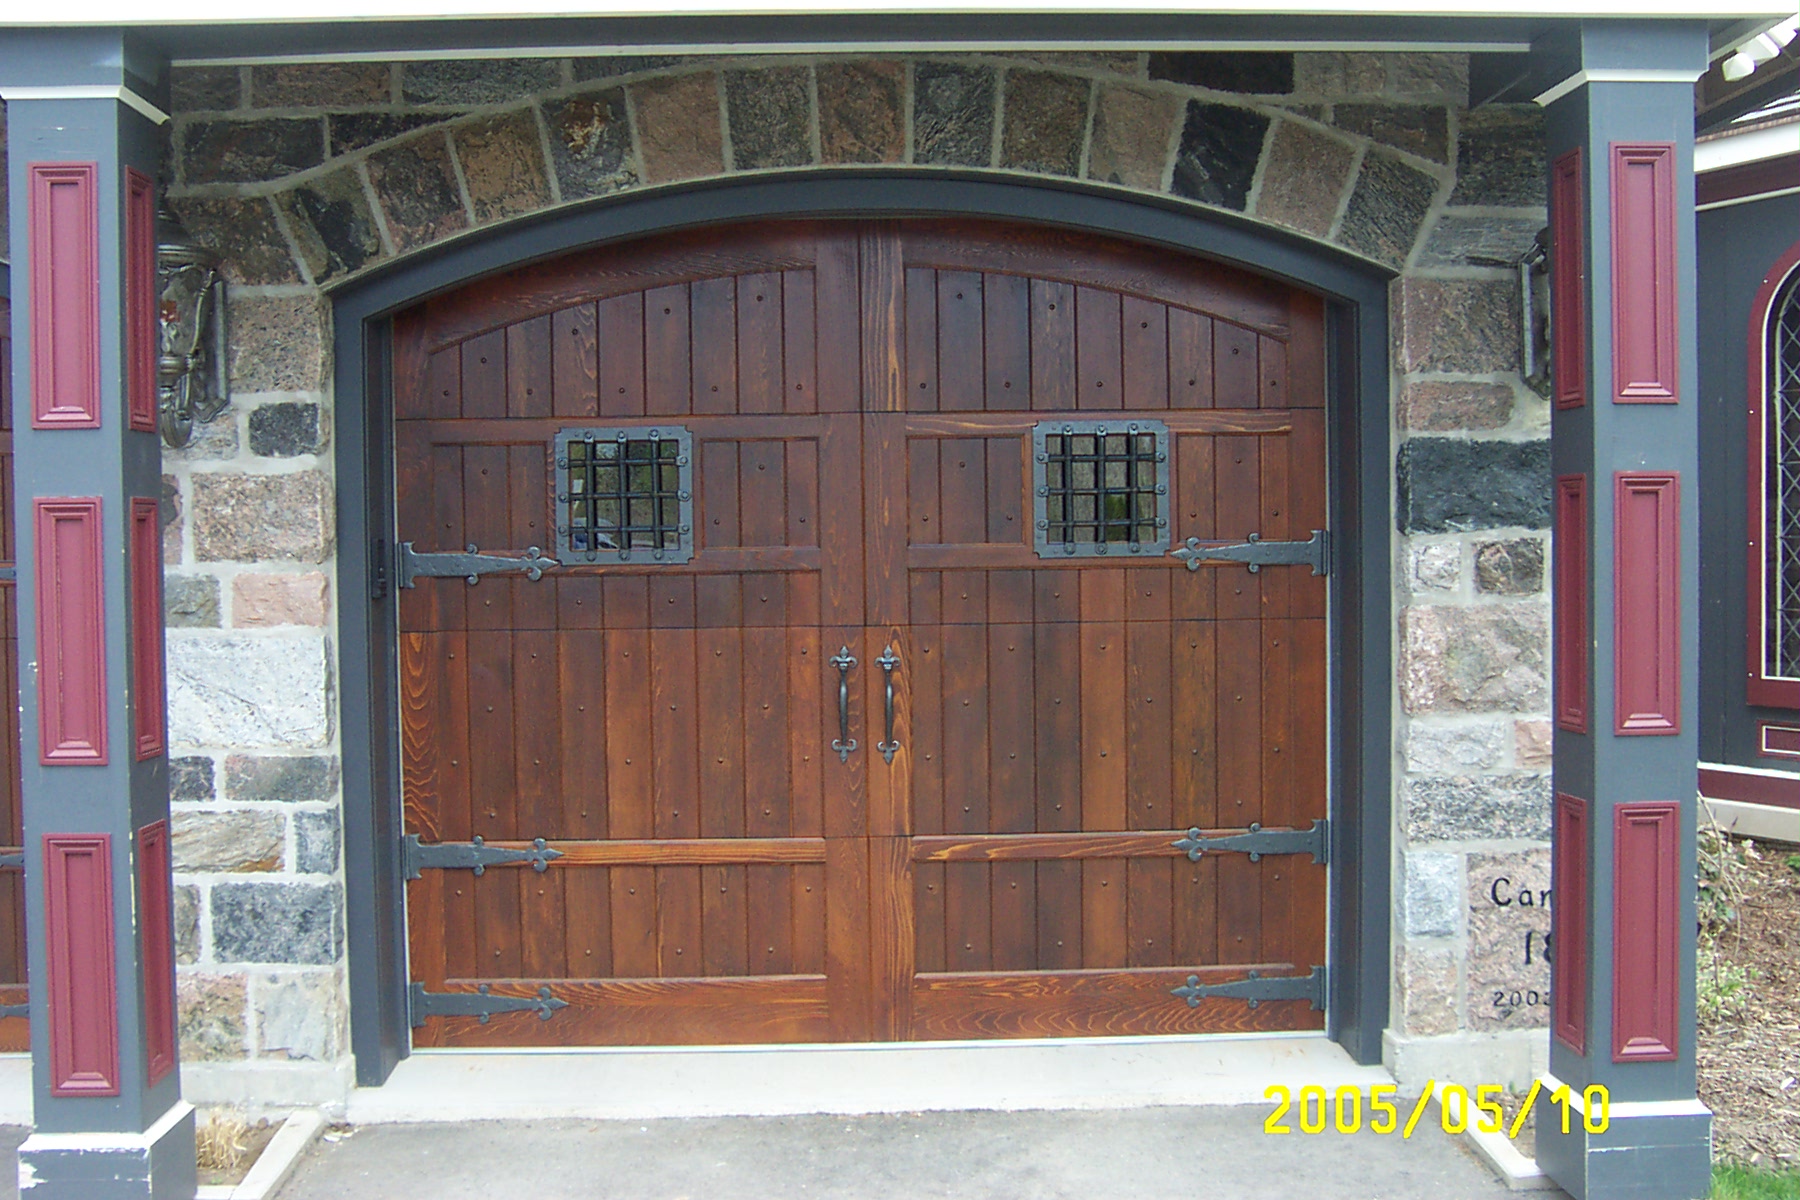 Simple Garage Wooden Door Ideas For Home Architecture With Varnished Wooden Material Small Window Iron Frame Amazing Block Wall Floor For Home Garage Design Ideas  Ideas